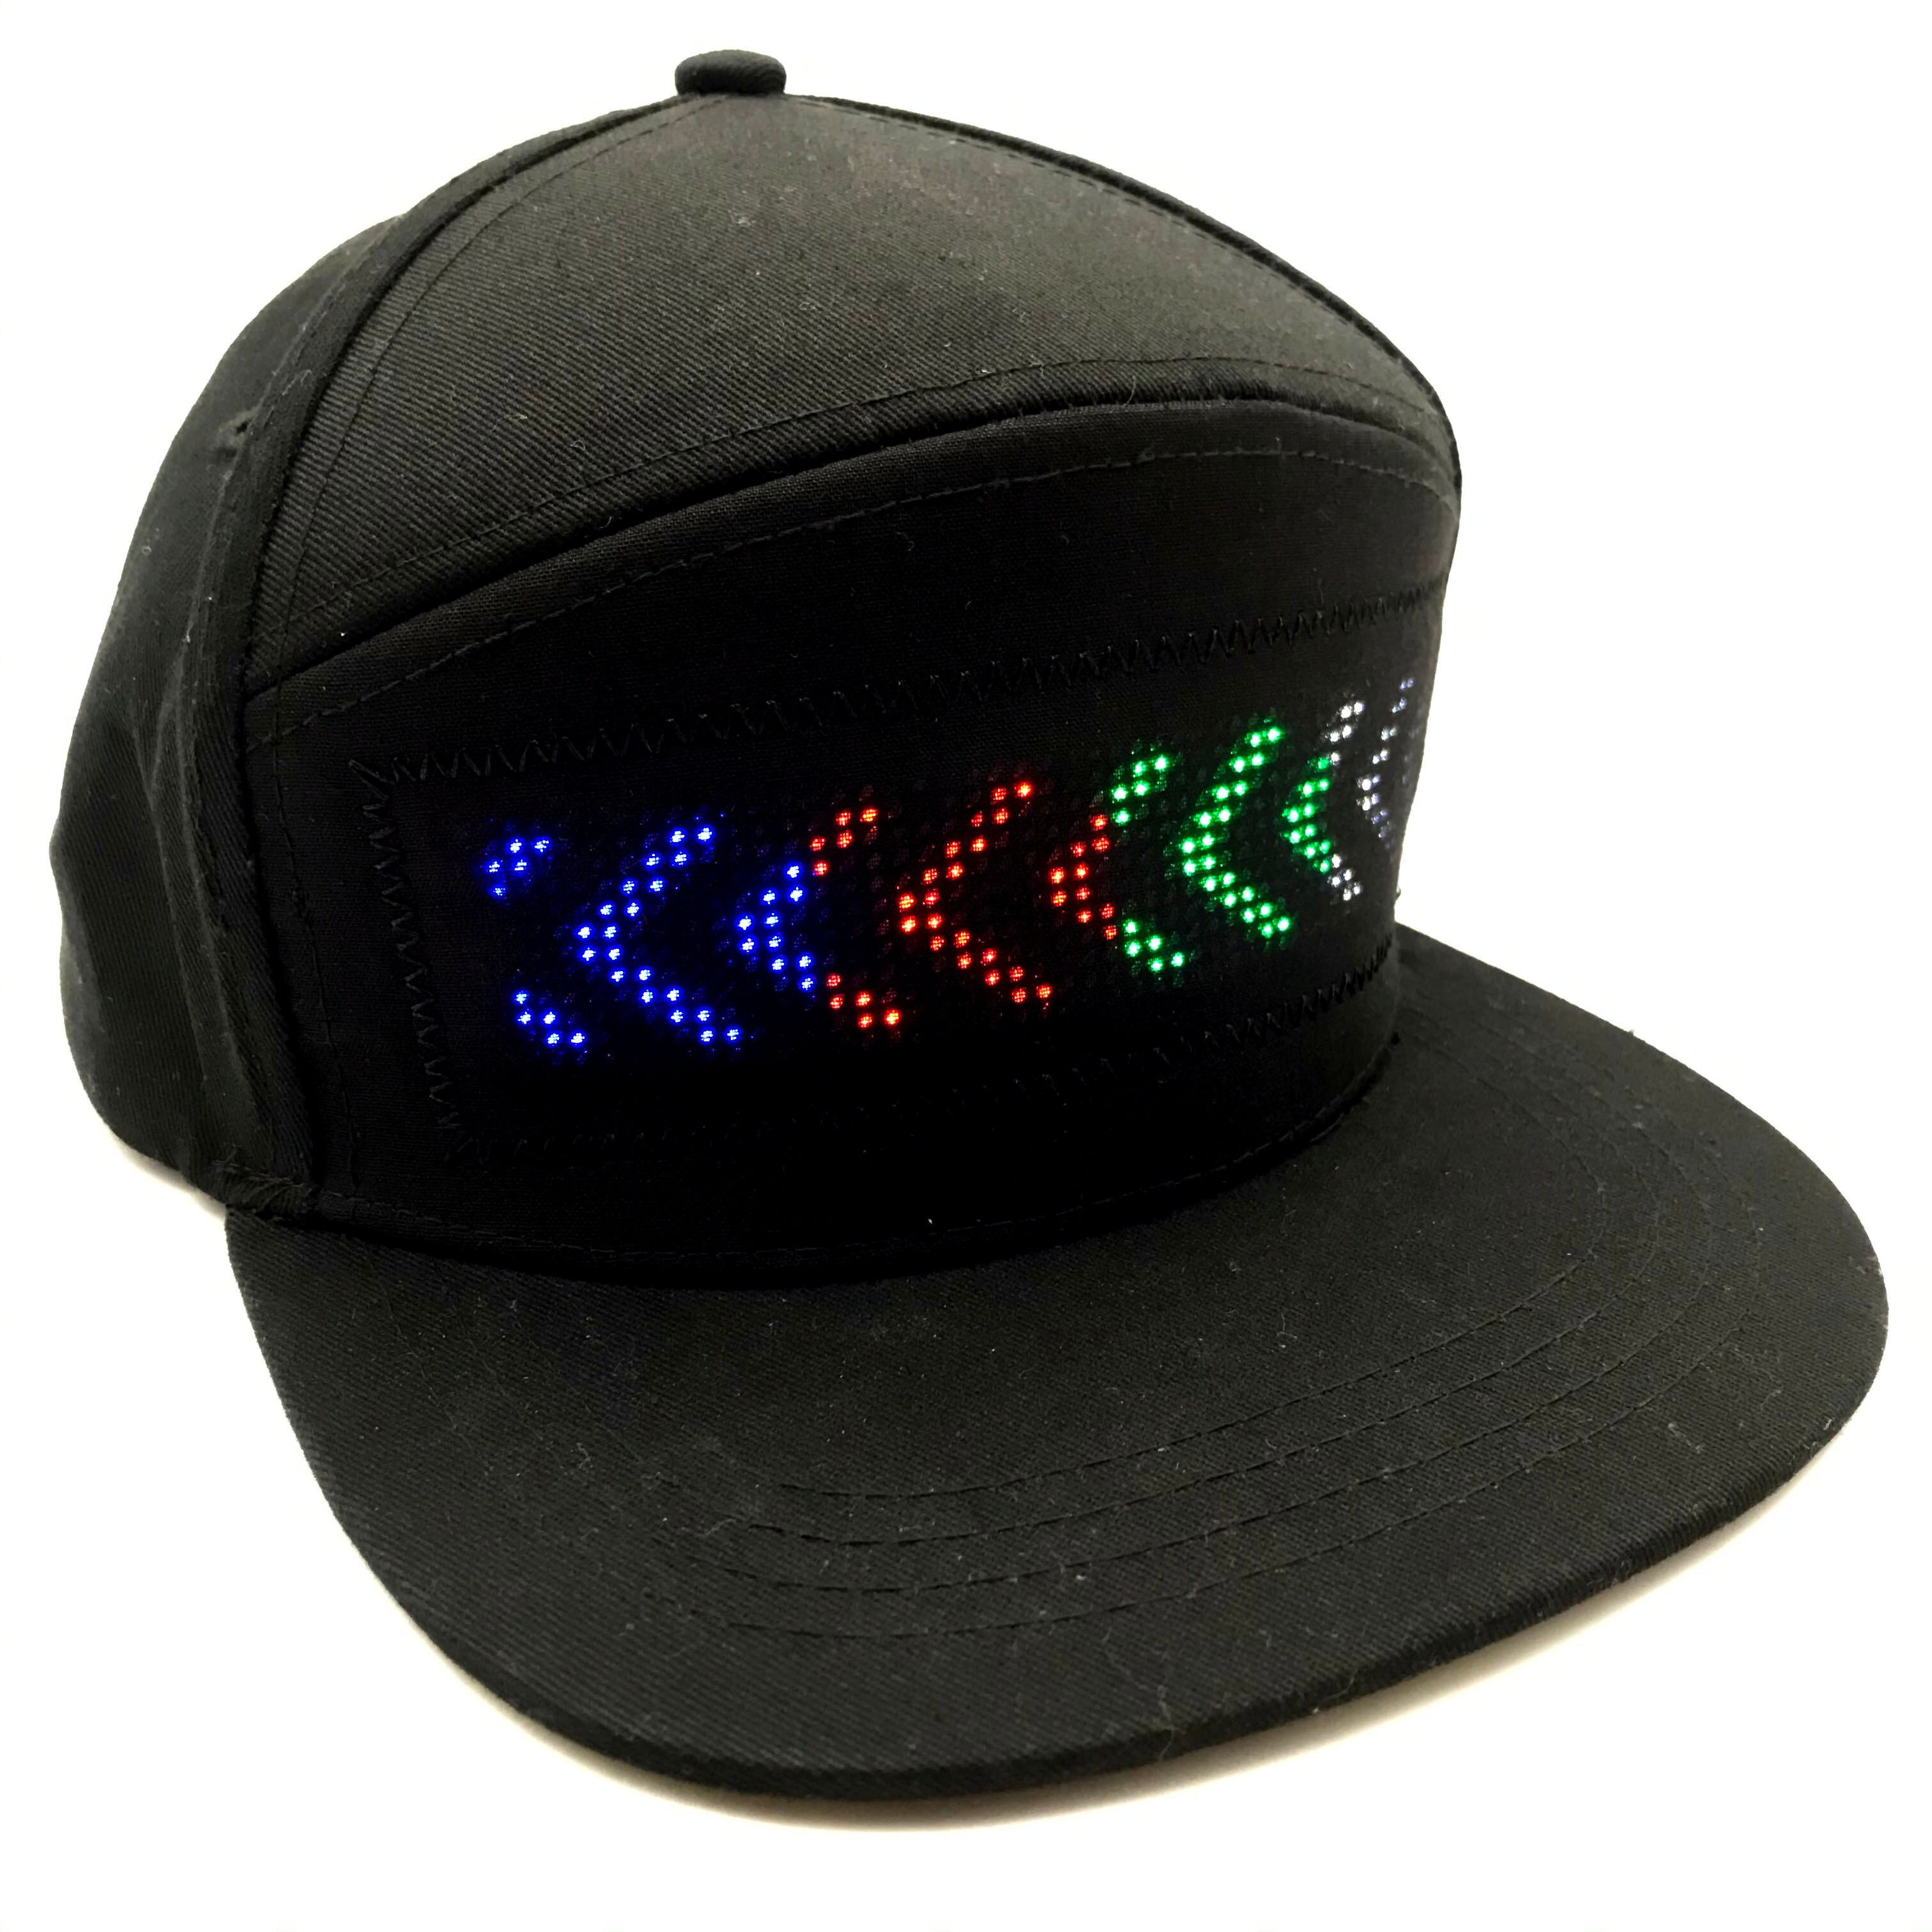 LED Cap, LED Display Screen Smart Hat Bluetooth Adjustable Cool Hat for Party Club: 4-color